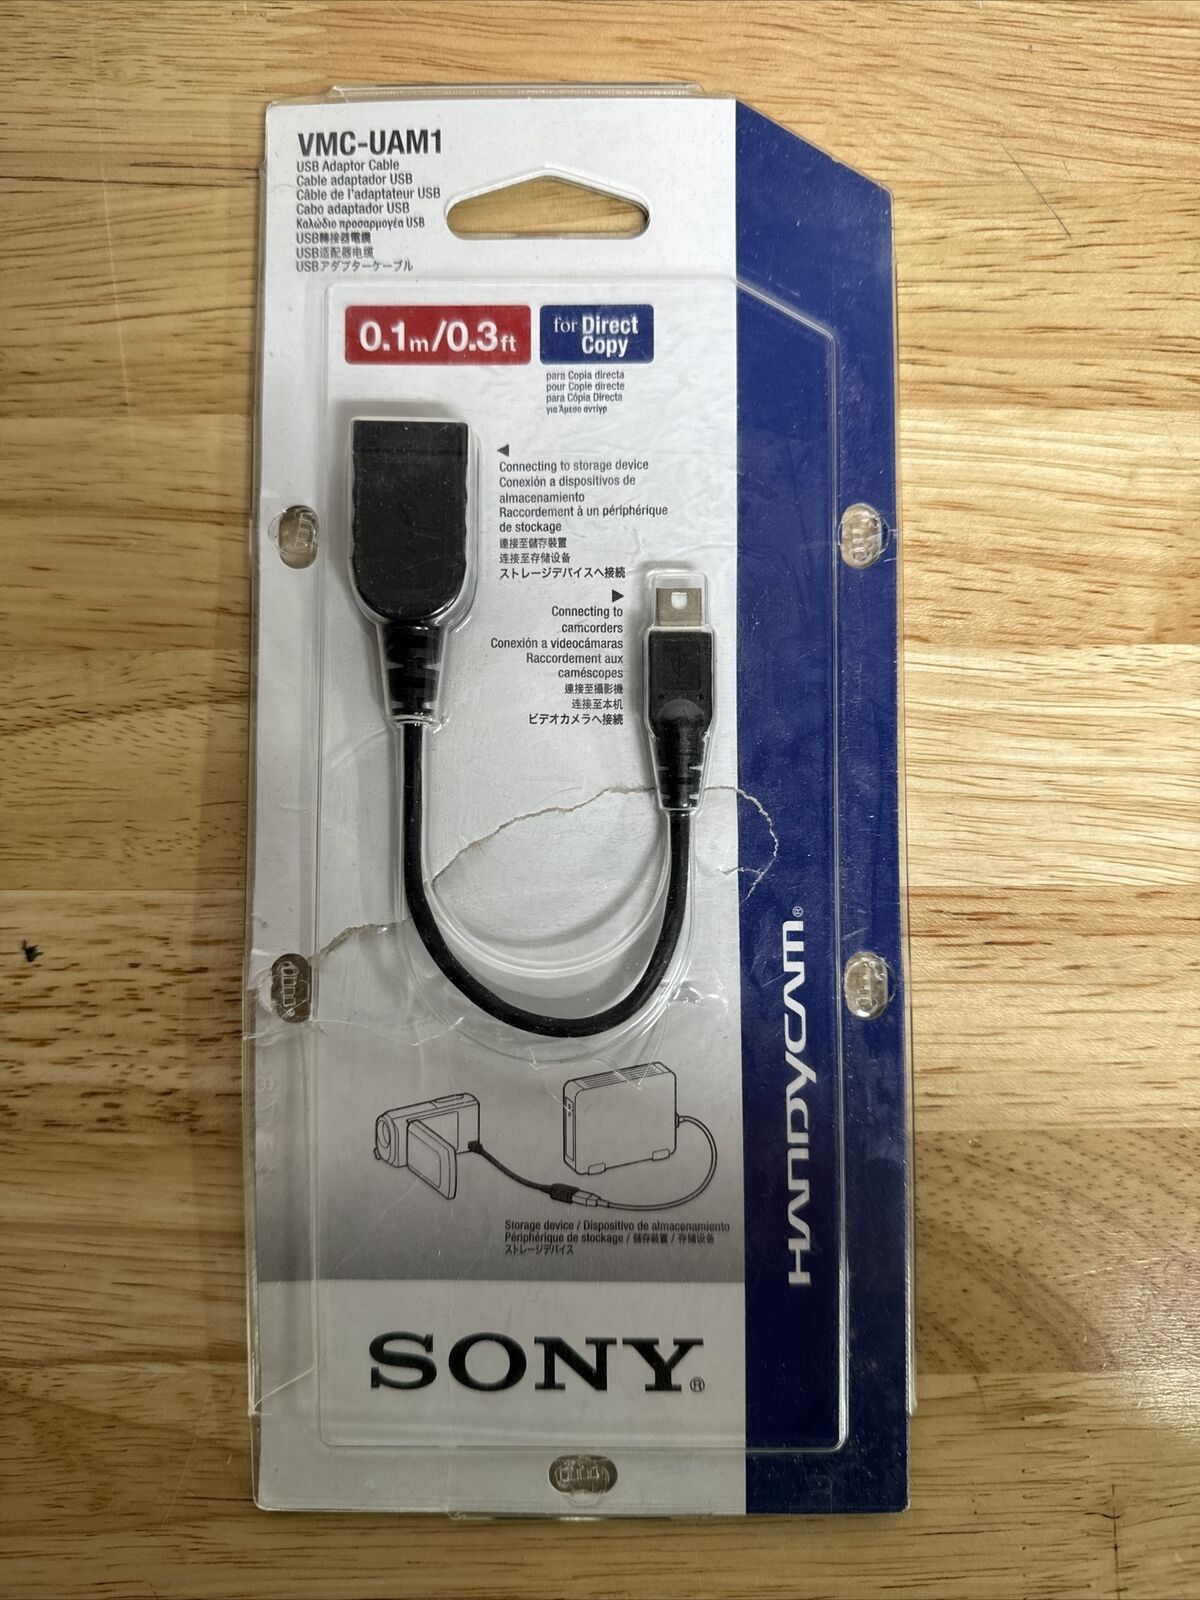 Sony VMC-UAM1 Handycam USB Adapter Cable for Direct Transfer